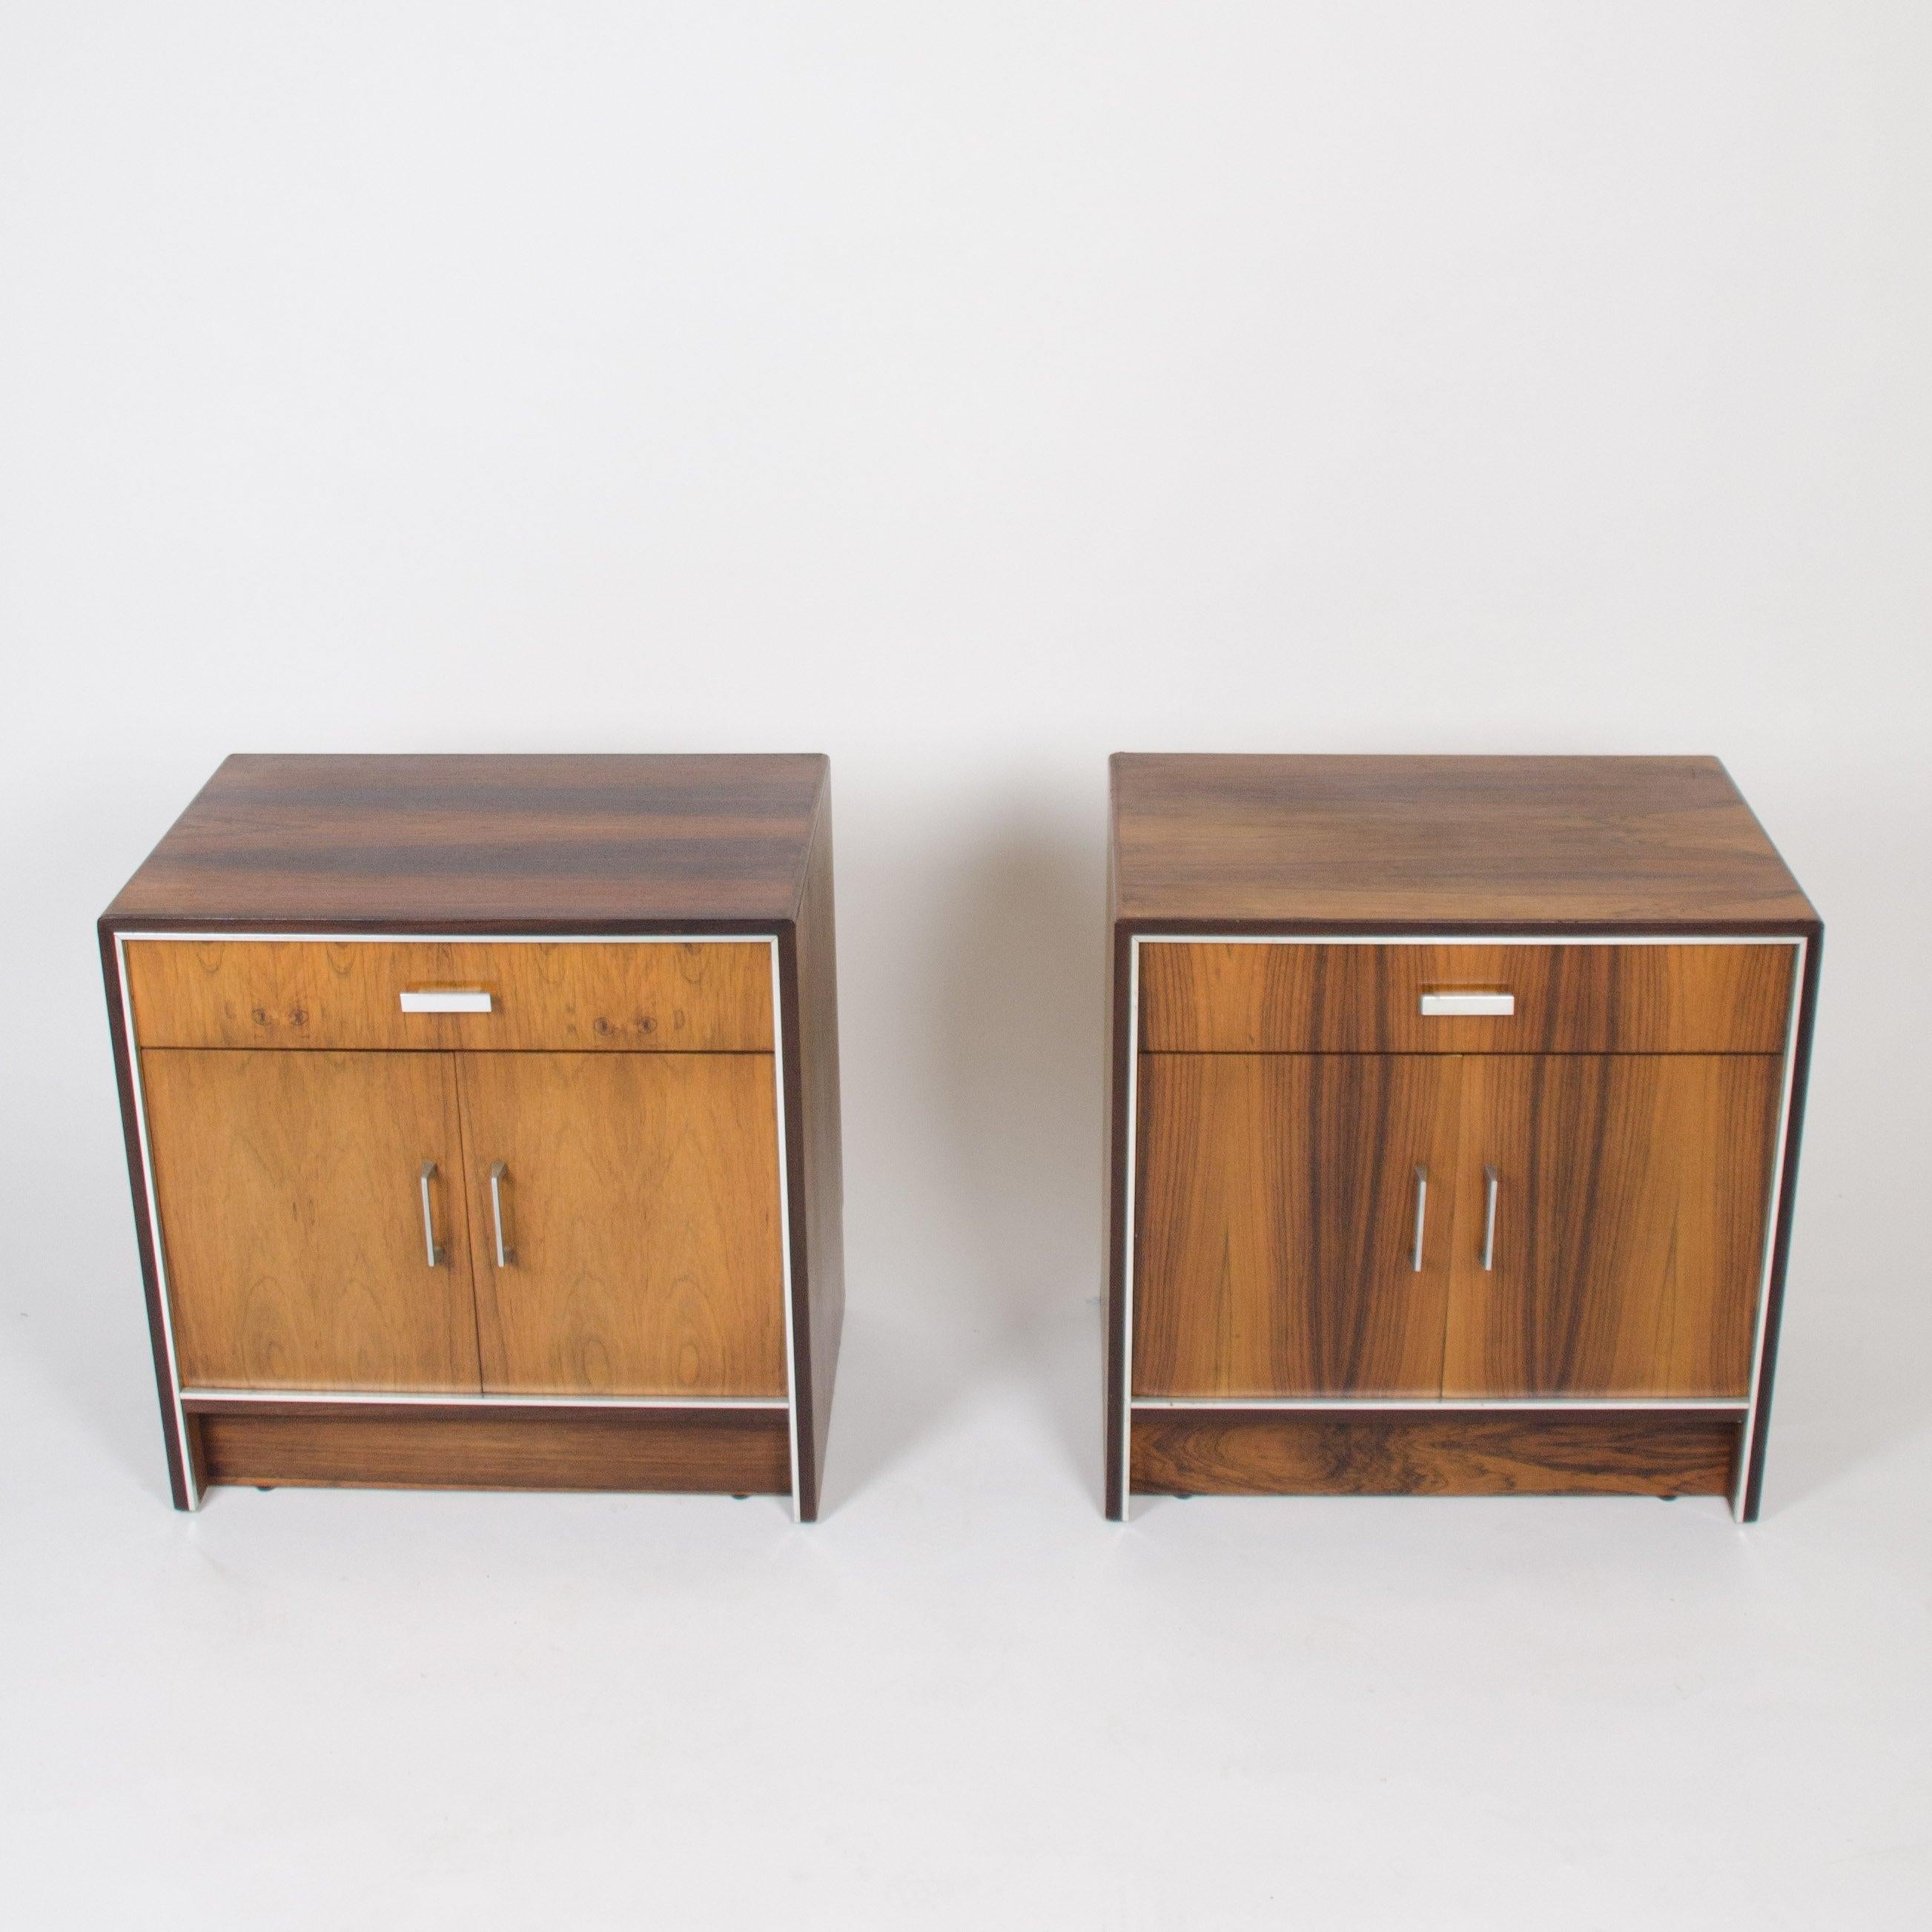 Listed for sale is a delightful pair of bedside cabinets / small dressers by Falster of Denmark, made from Brazilian Rosewood.The pieces were purchased from Maurice Villency, a high end furniture store that was known for importing high quality